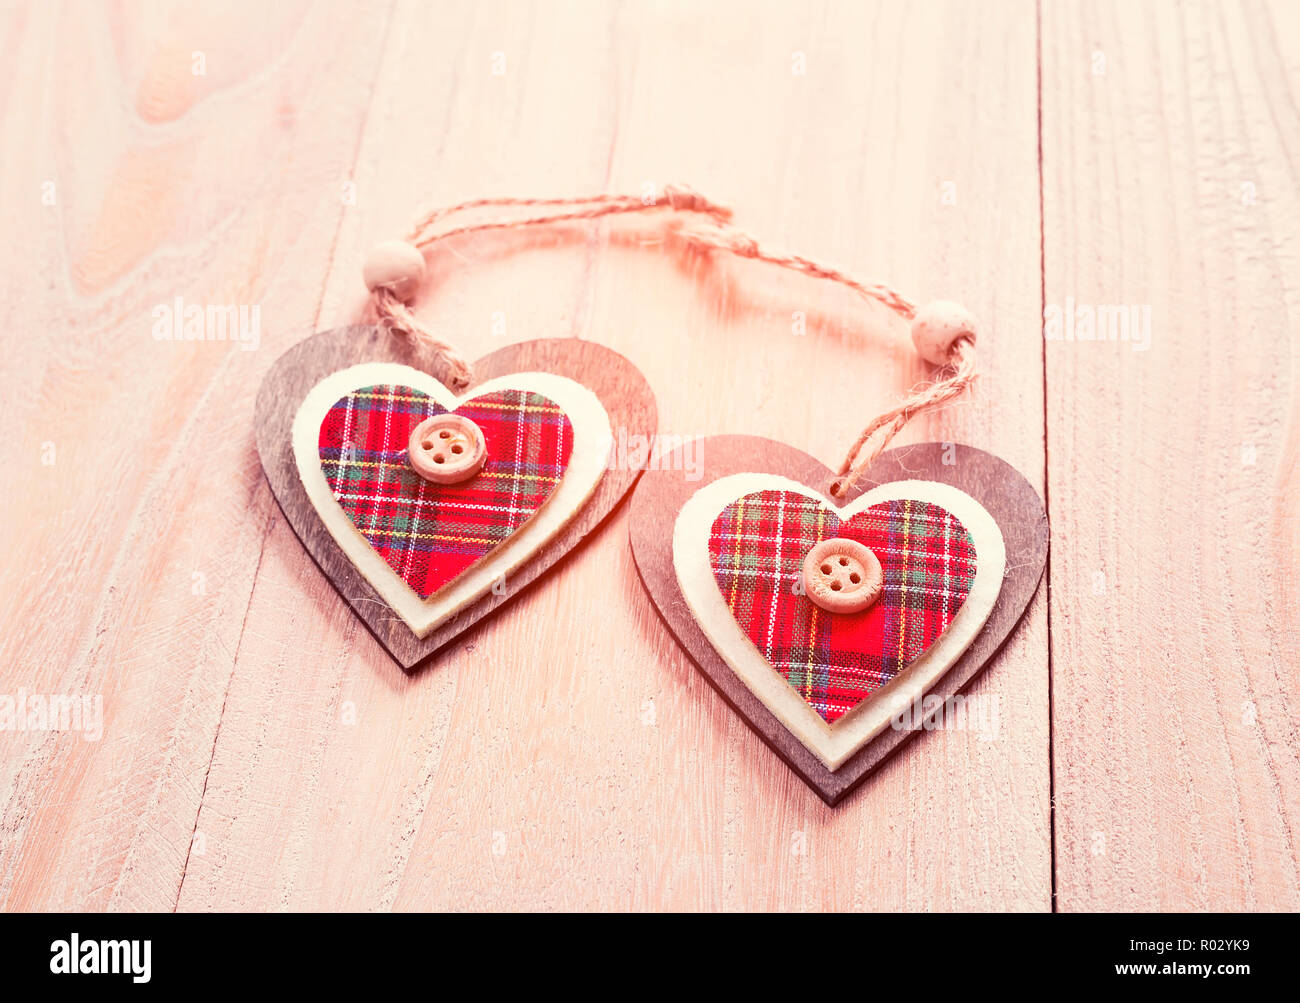 Christmas decoration red, white, gingham, stripes fabric stars and heart shape with buttons on rustic Elm wood background Stock Photo